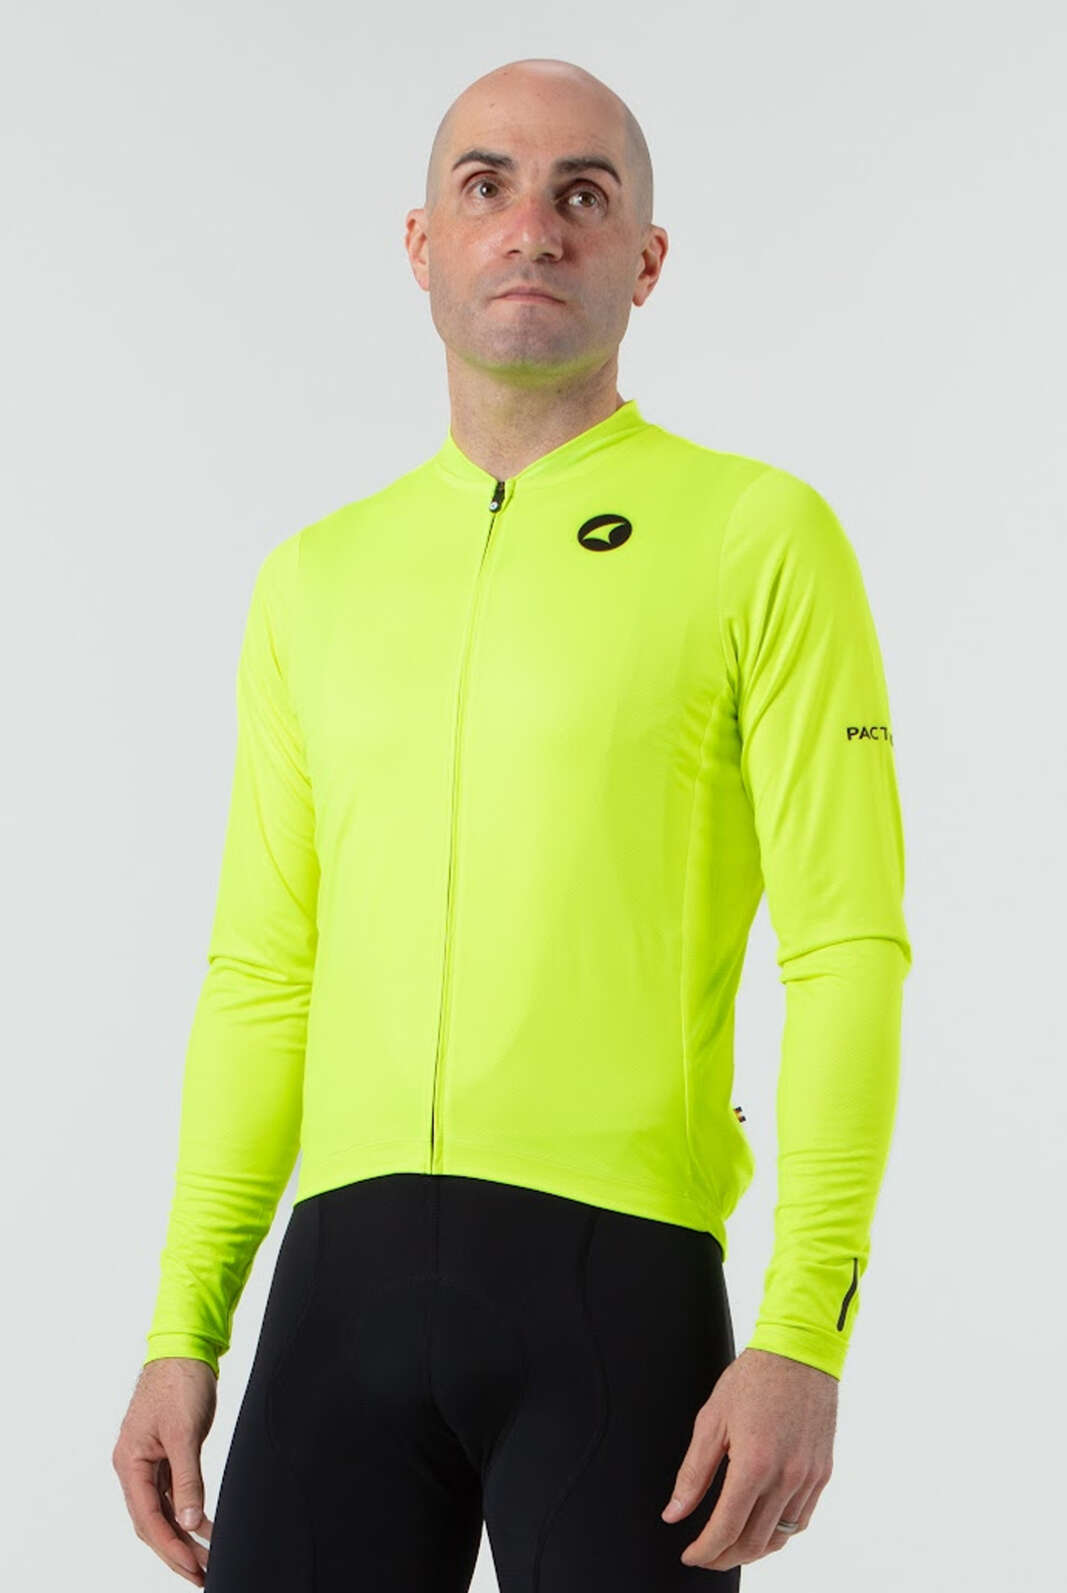 Men's High-Viz Yellow Long Sleeve Cycling Jersey - Ascent Front View